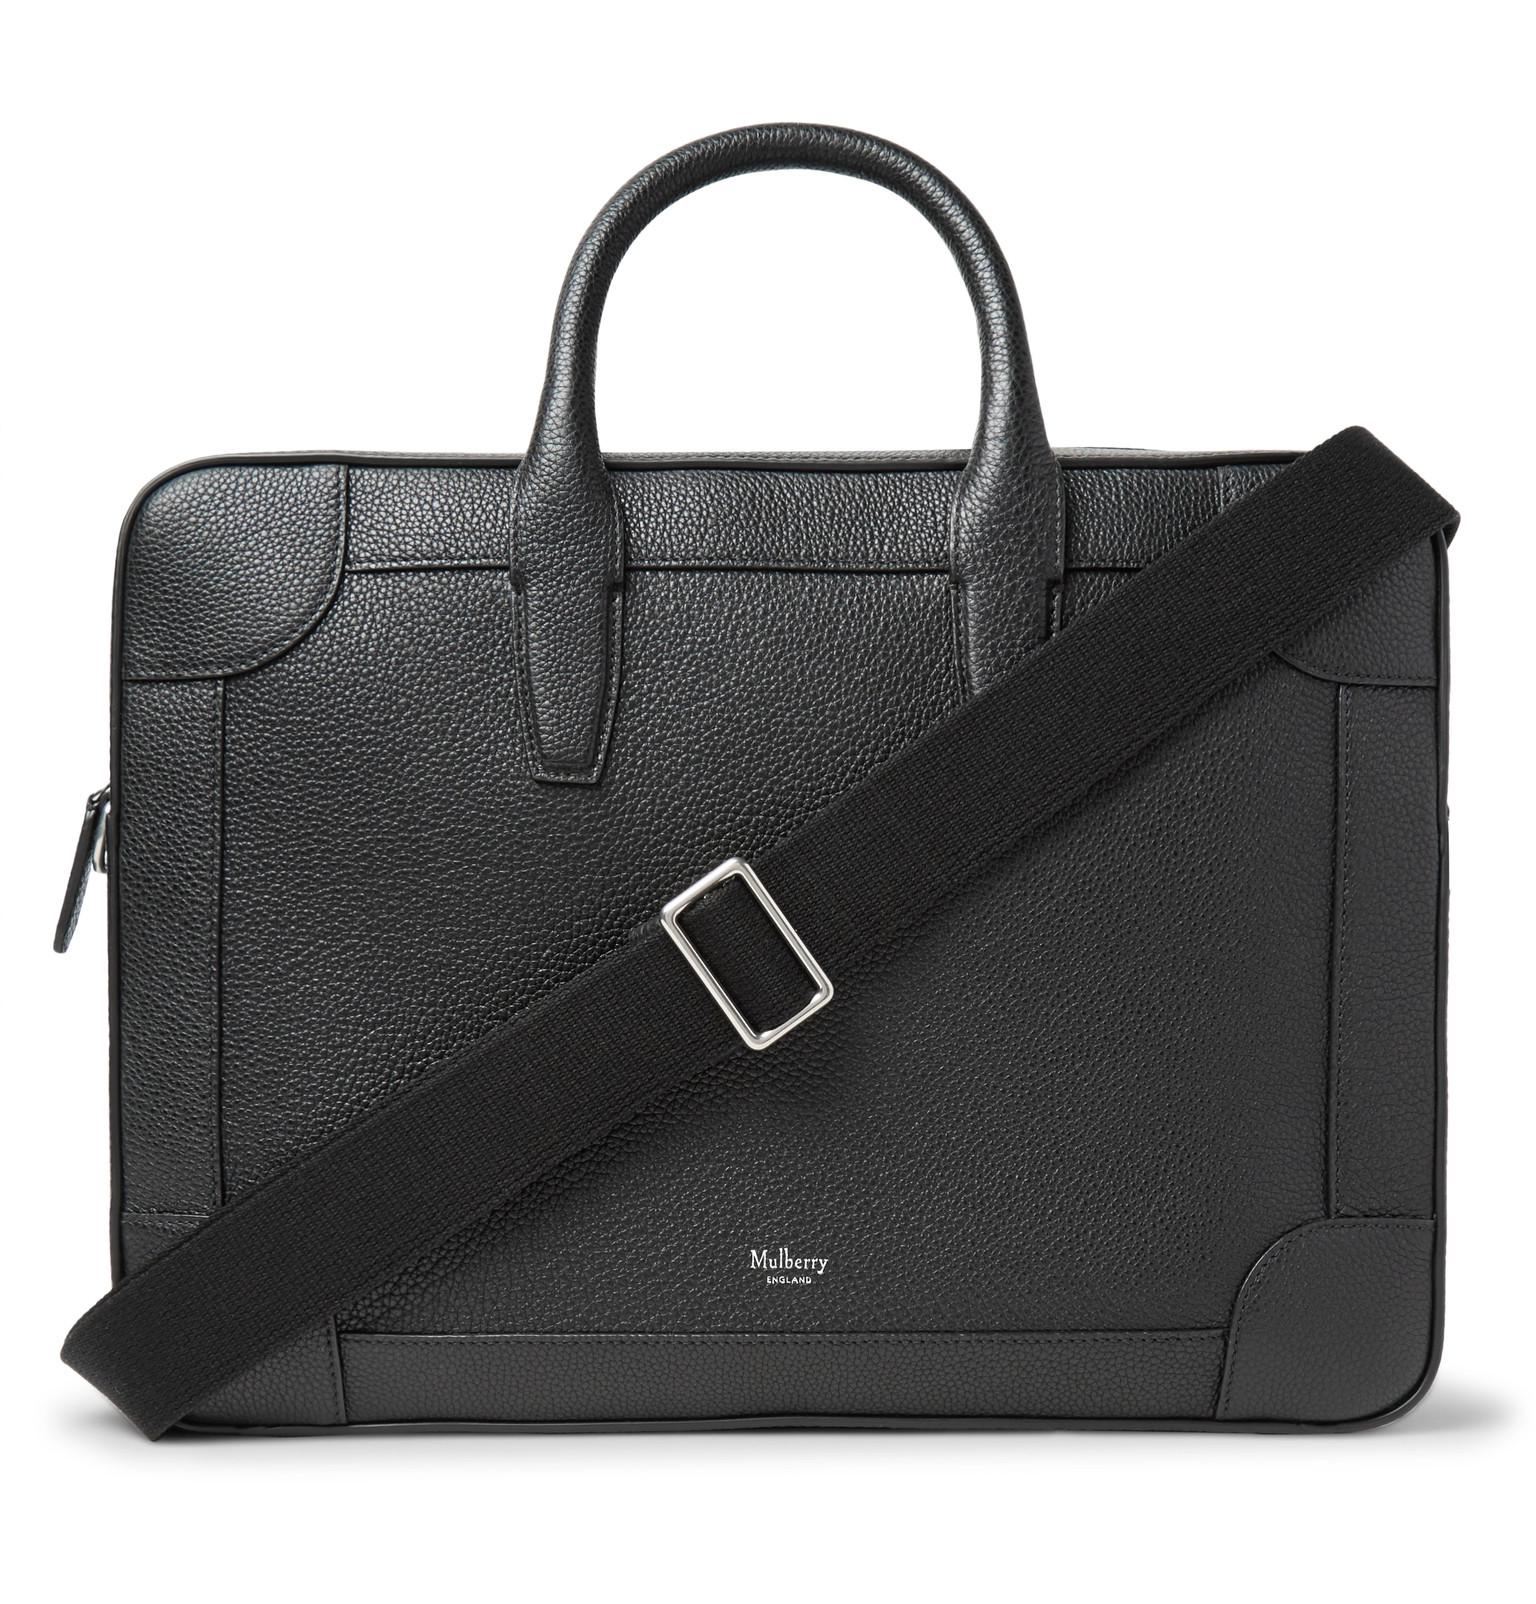 Lyst - Mulberry Full-grain Leather Briefcase in Black for Men - Save 61%